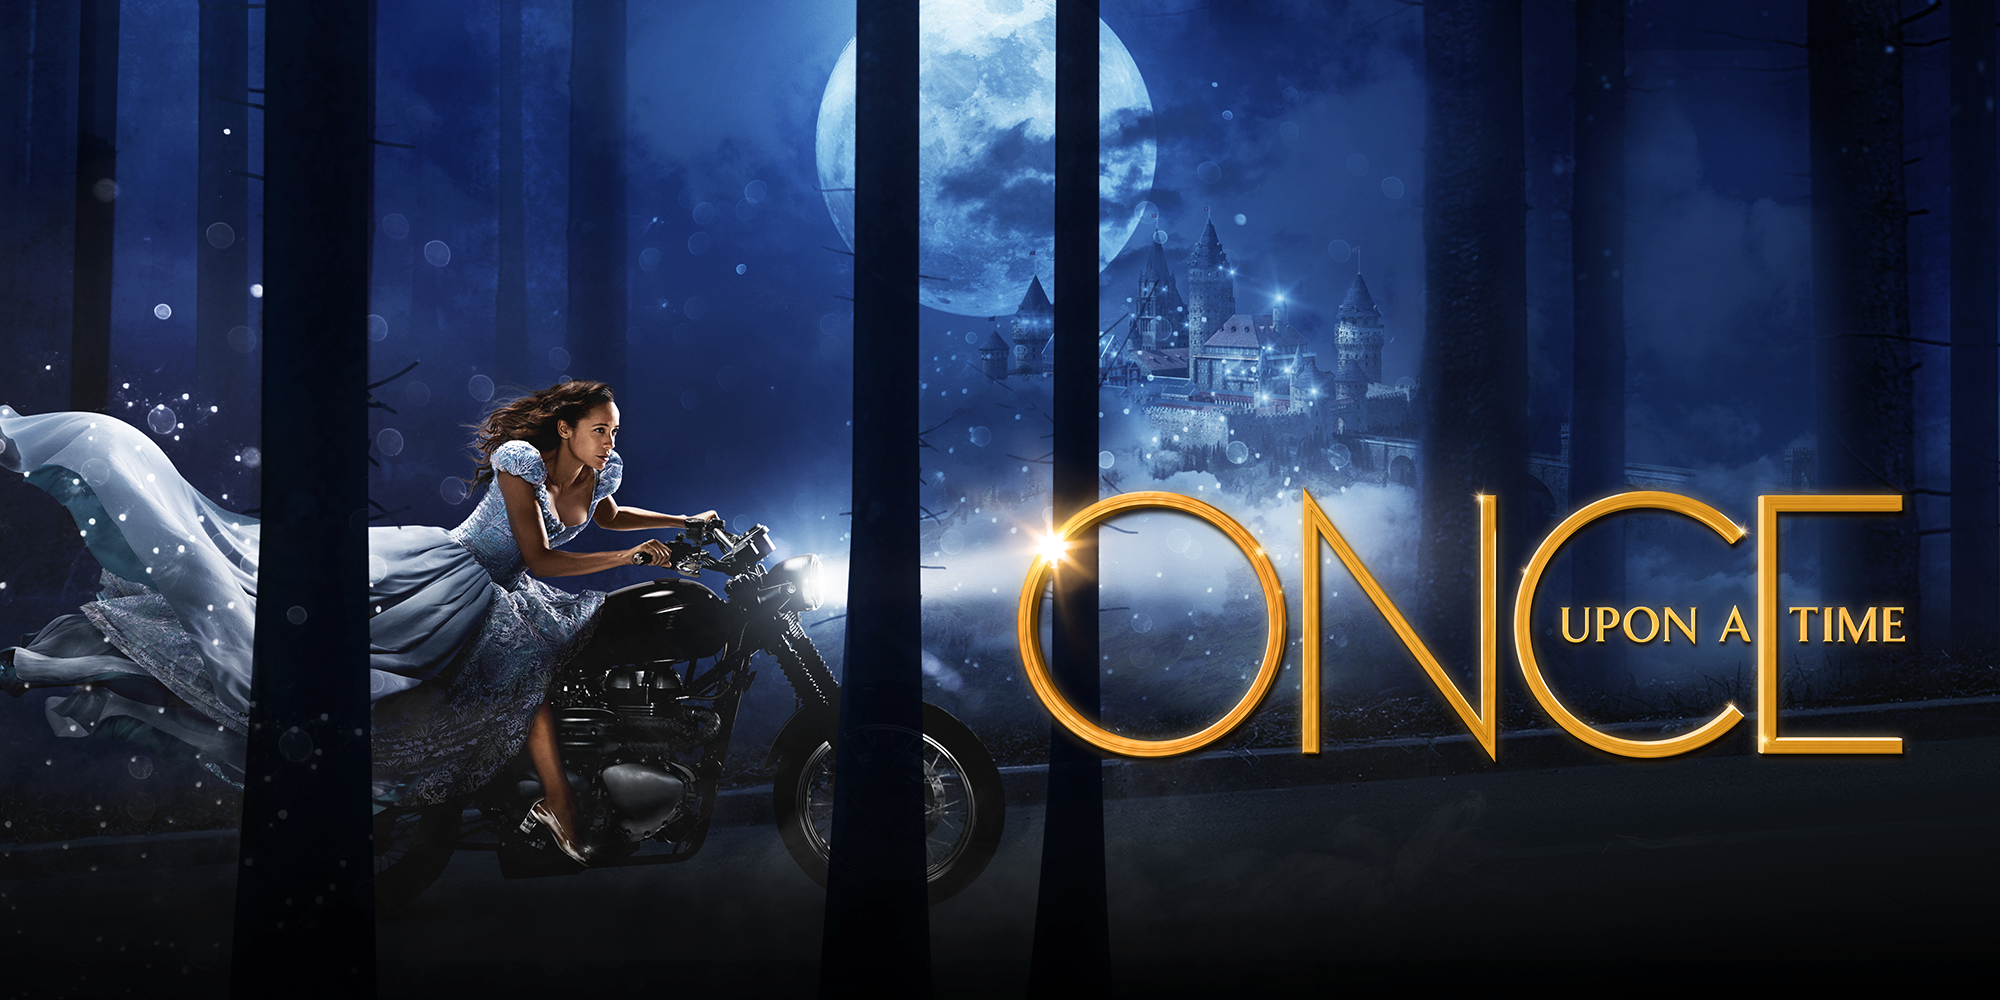 Photos from 15 Disney Characters We Need to See On OUAT